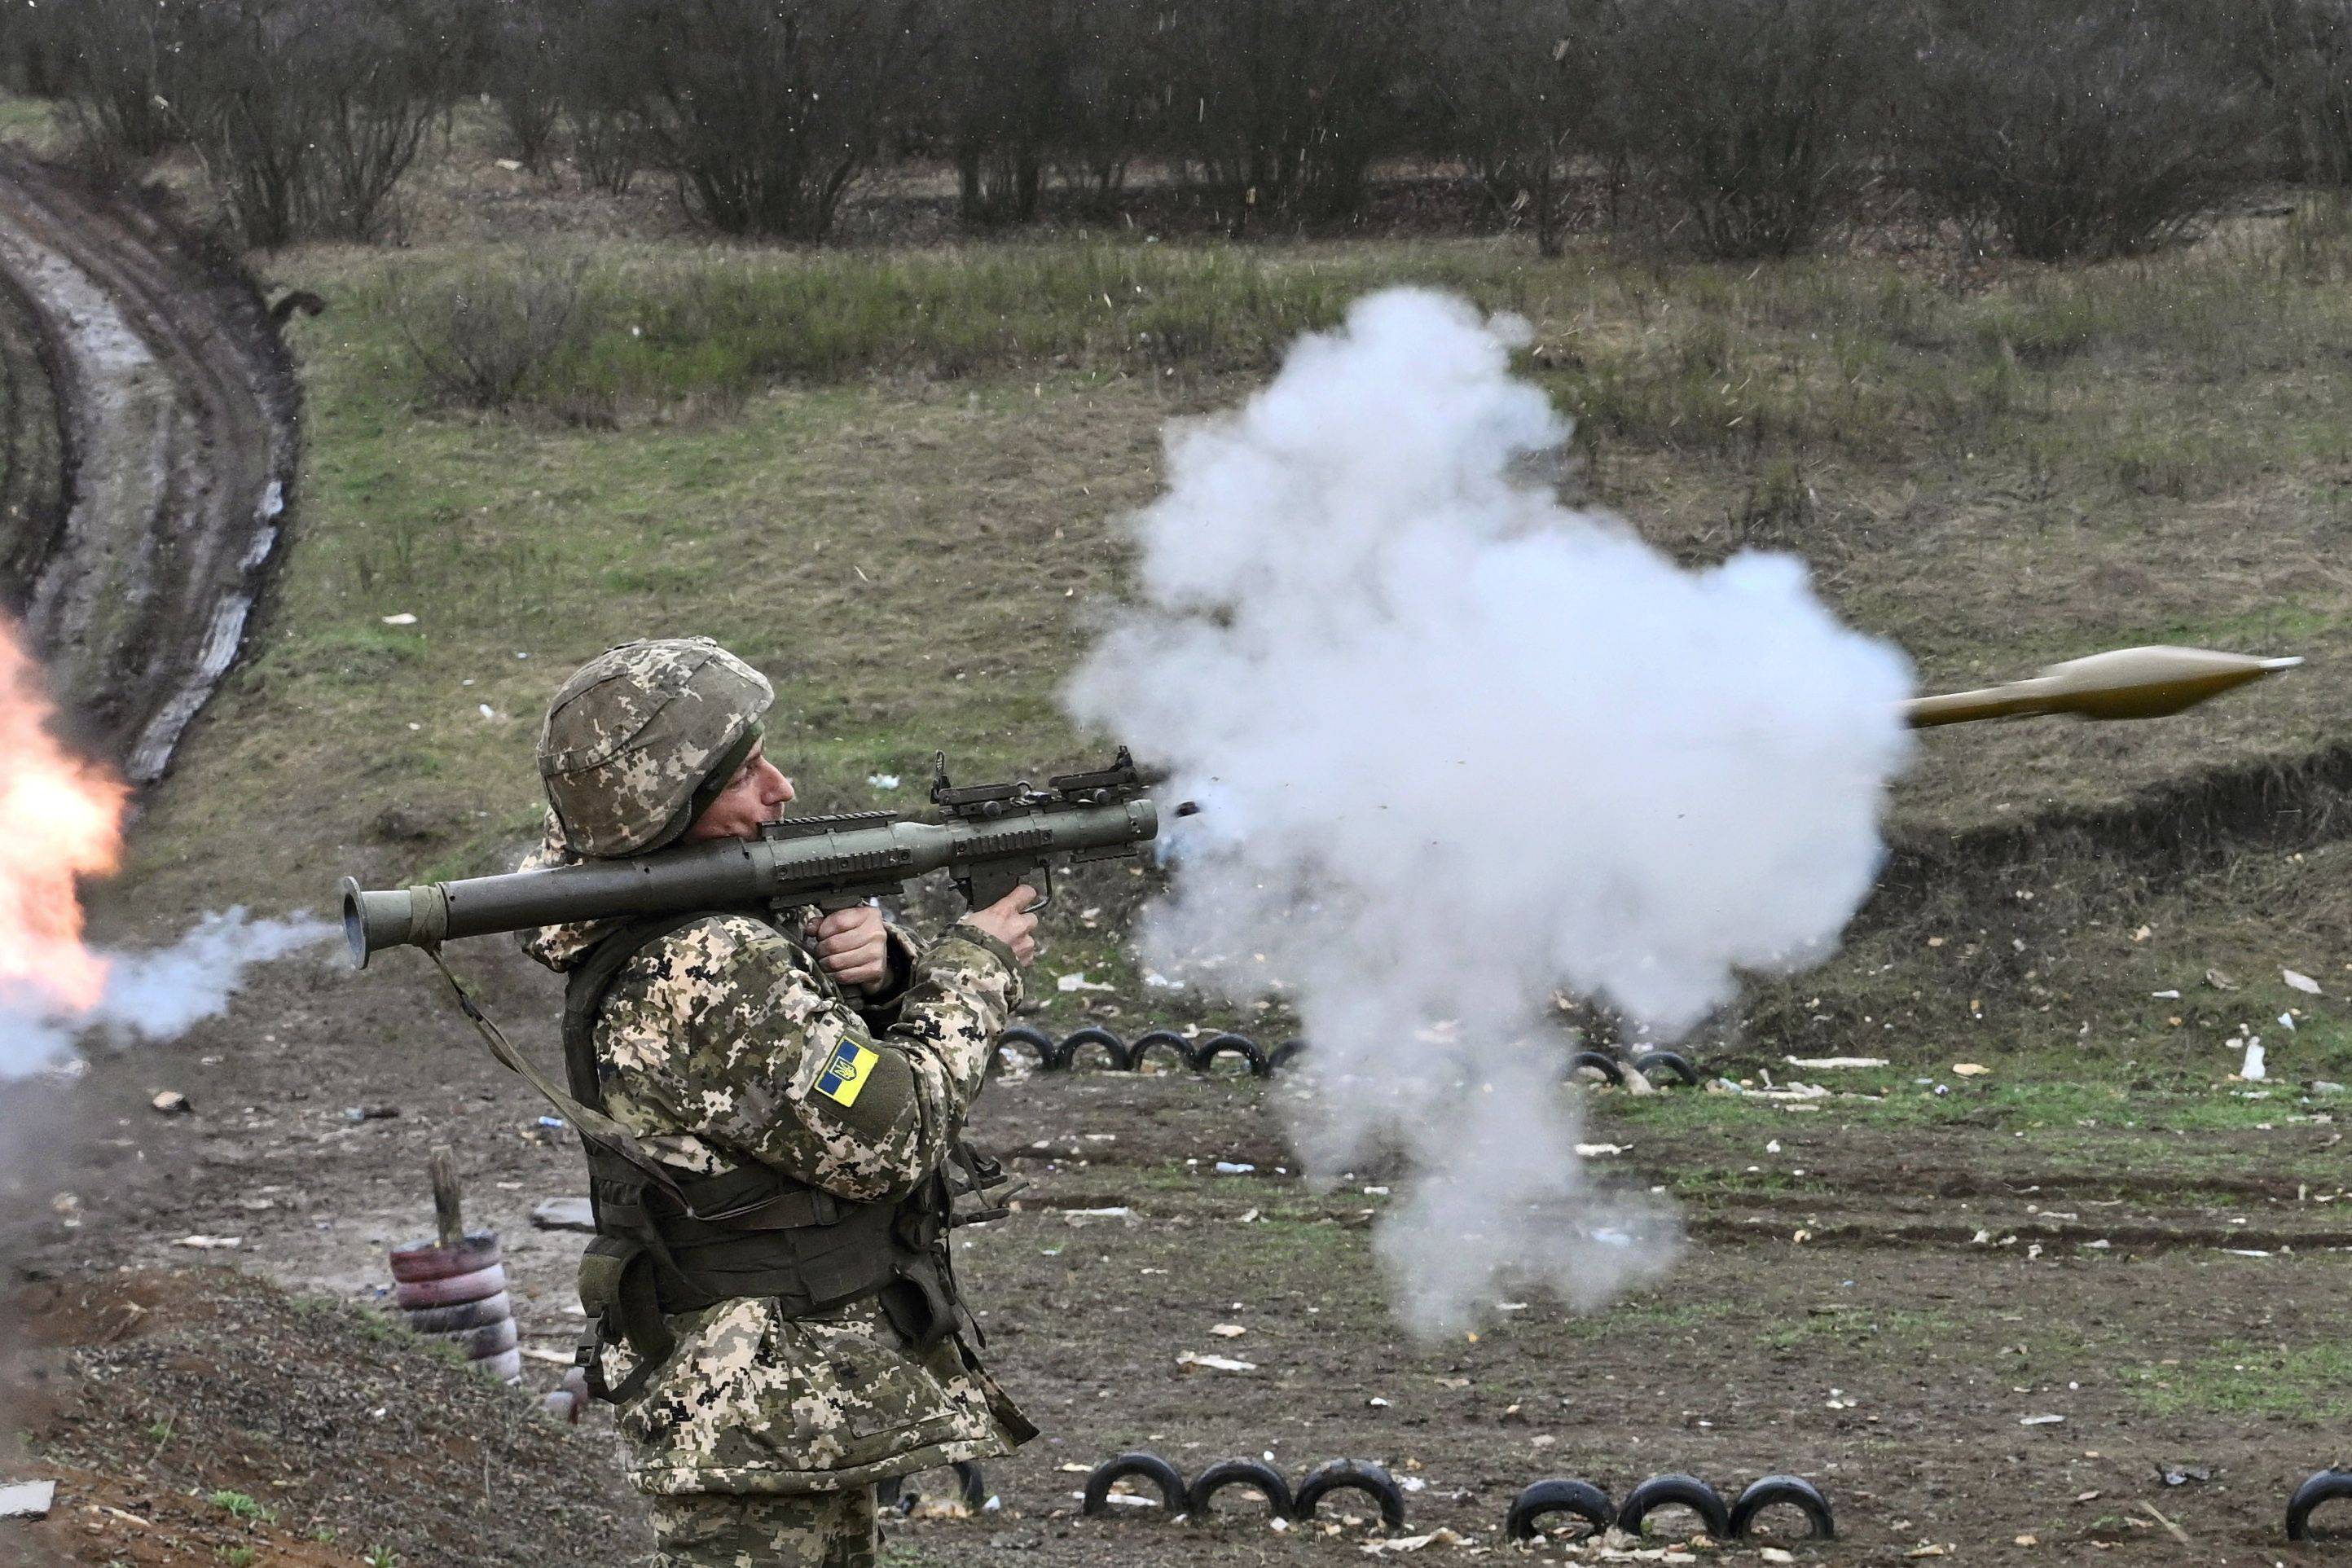 A Ukrainian serviceman fires a rocket-propelled grenade during a training exercise in the Donetsk region on Thursday. | AFP-JIJI